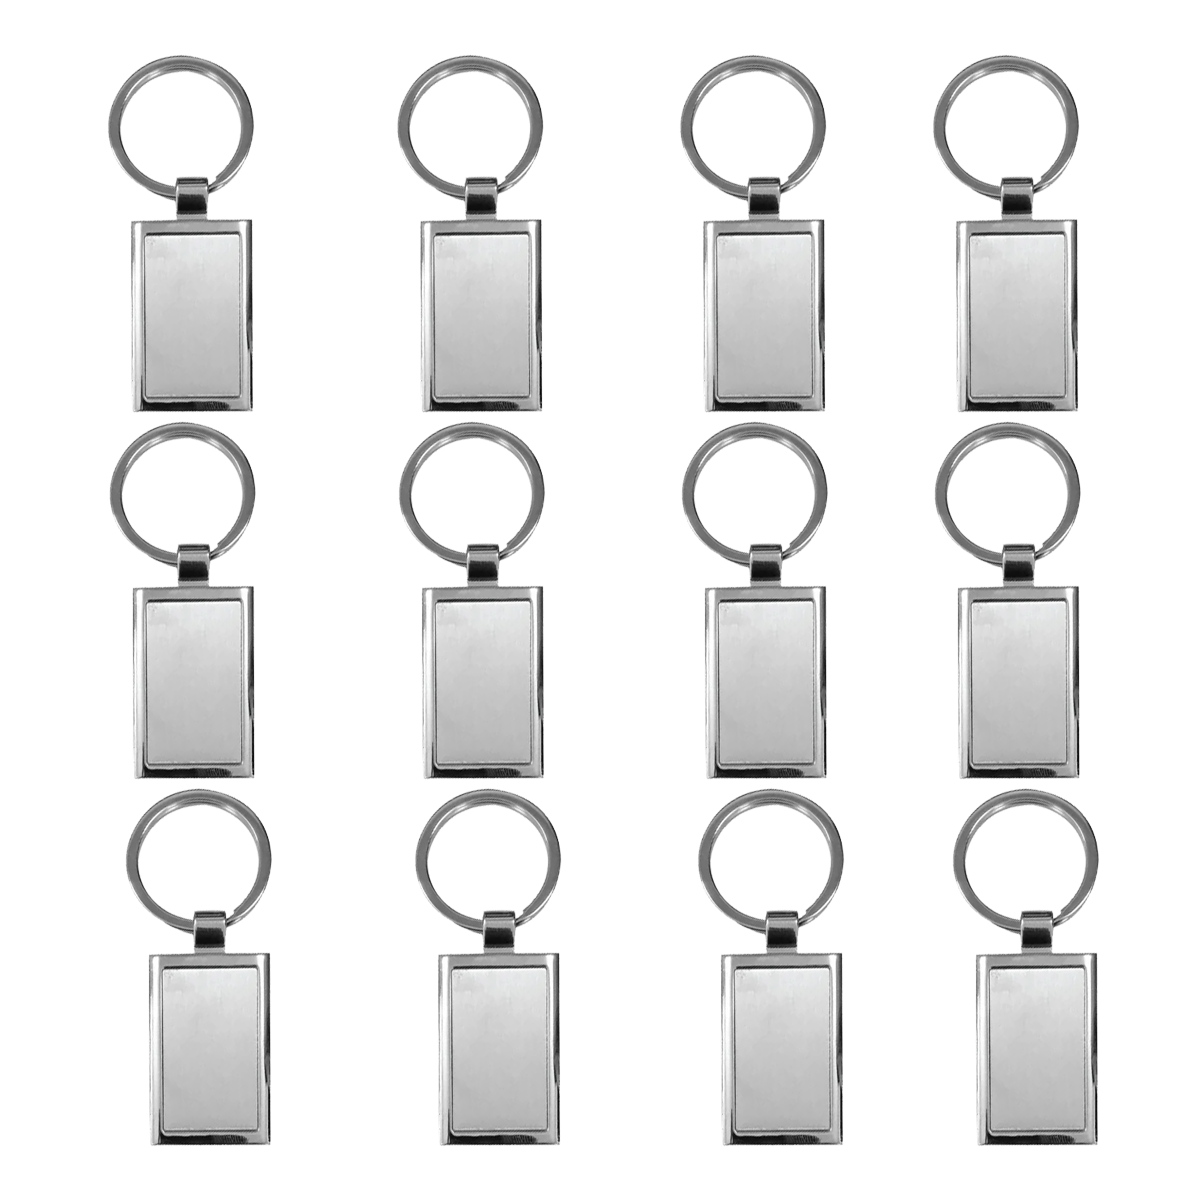 Olmecs Promotional Rectangle Shaped Metal Keychain (12 Pc Pack)